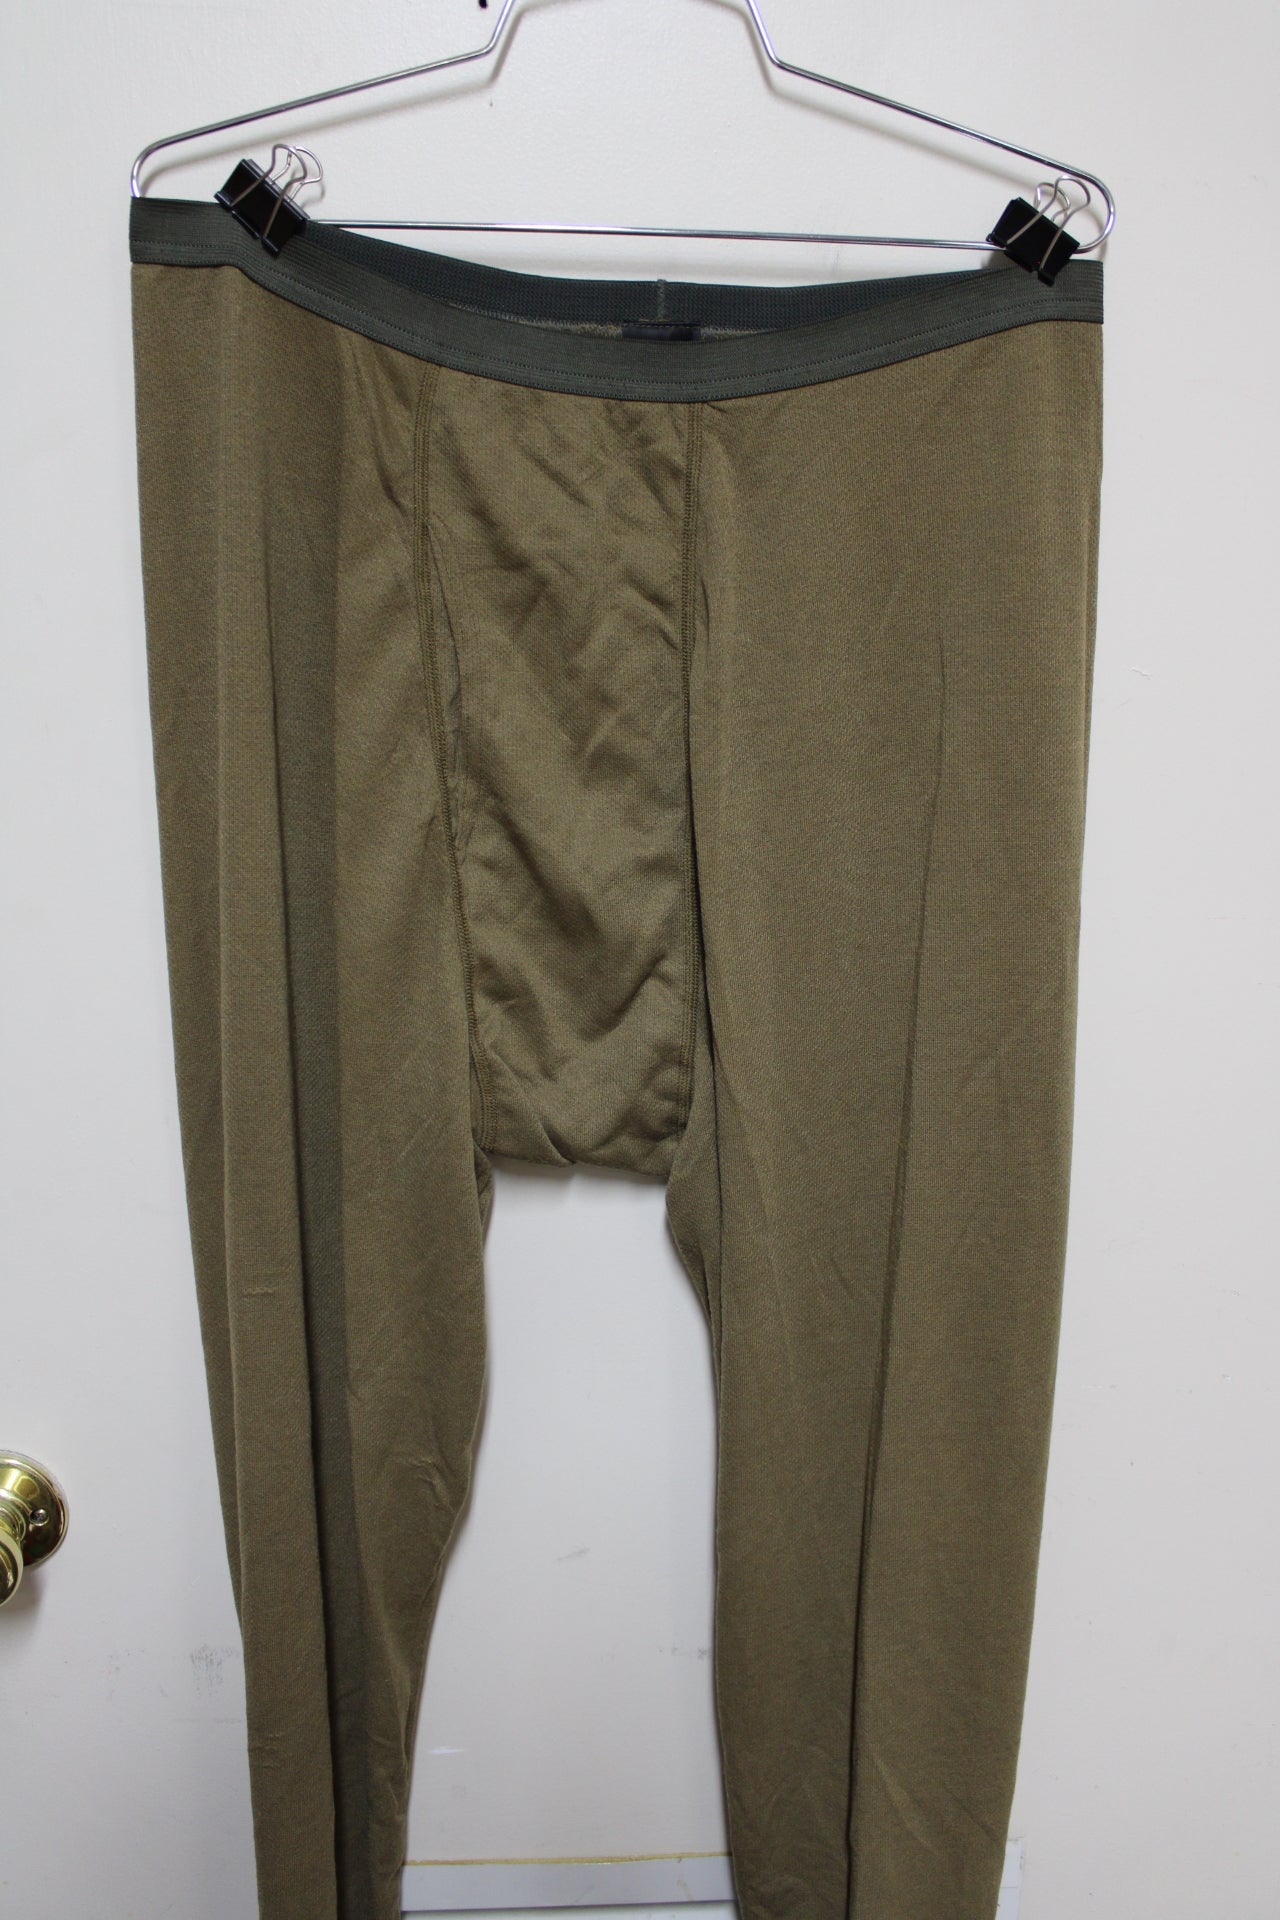 US Army Orc Industries Bronzine Style #104 Pants Level 1 X-Large Long (jn waf2-36p)